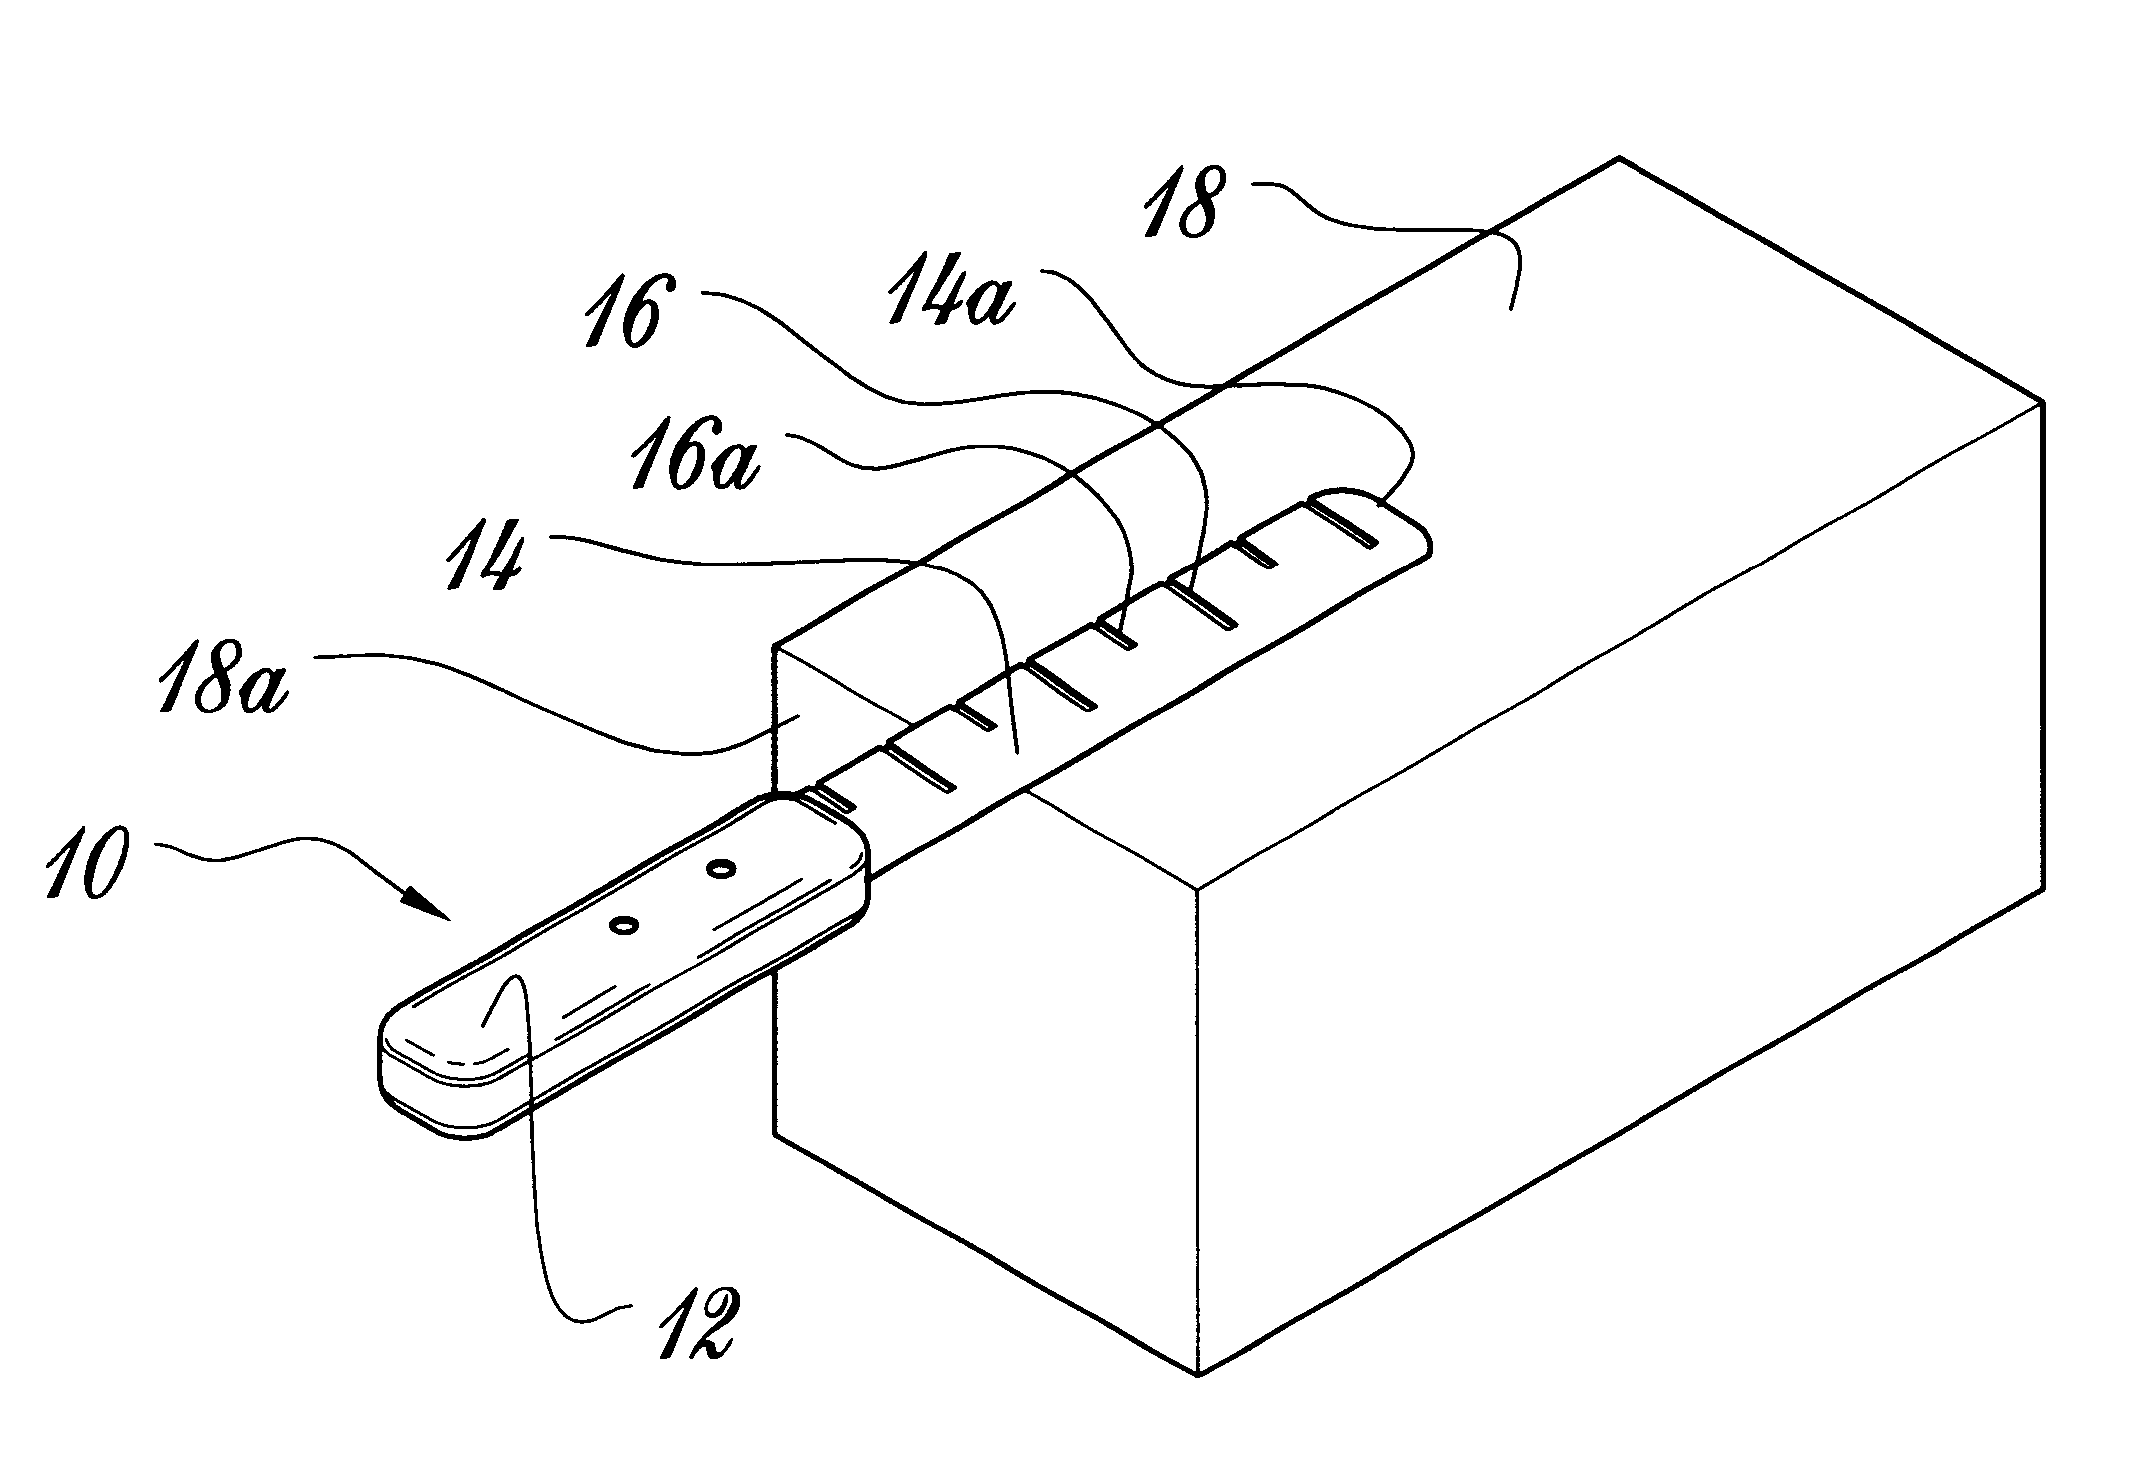 Graduated food-cutting knife and method of use thereof